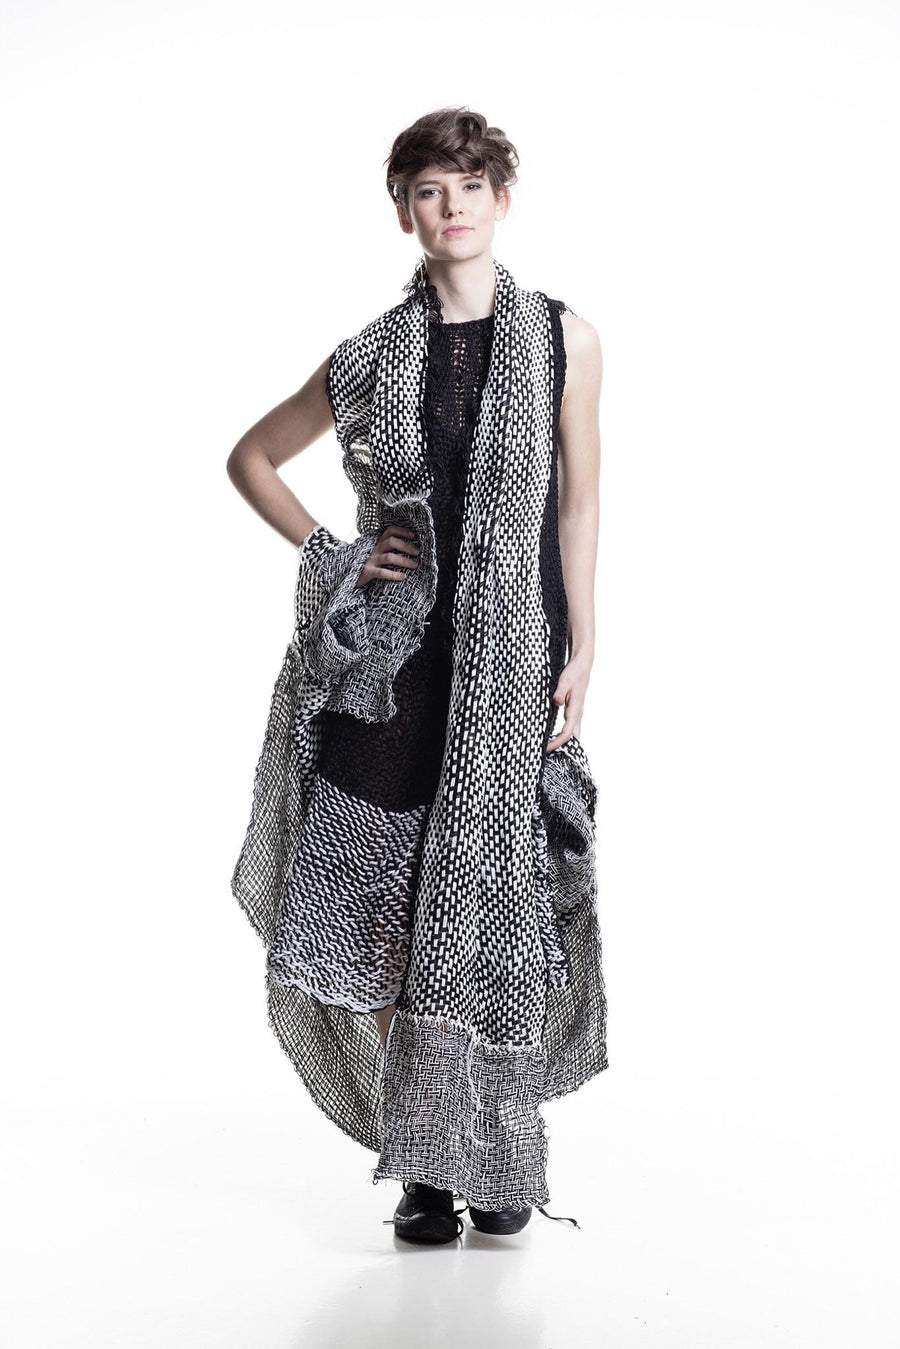 Amano distressed linen, loom woven bell dress